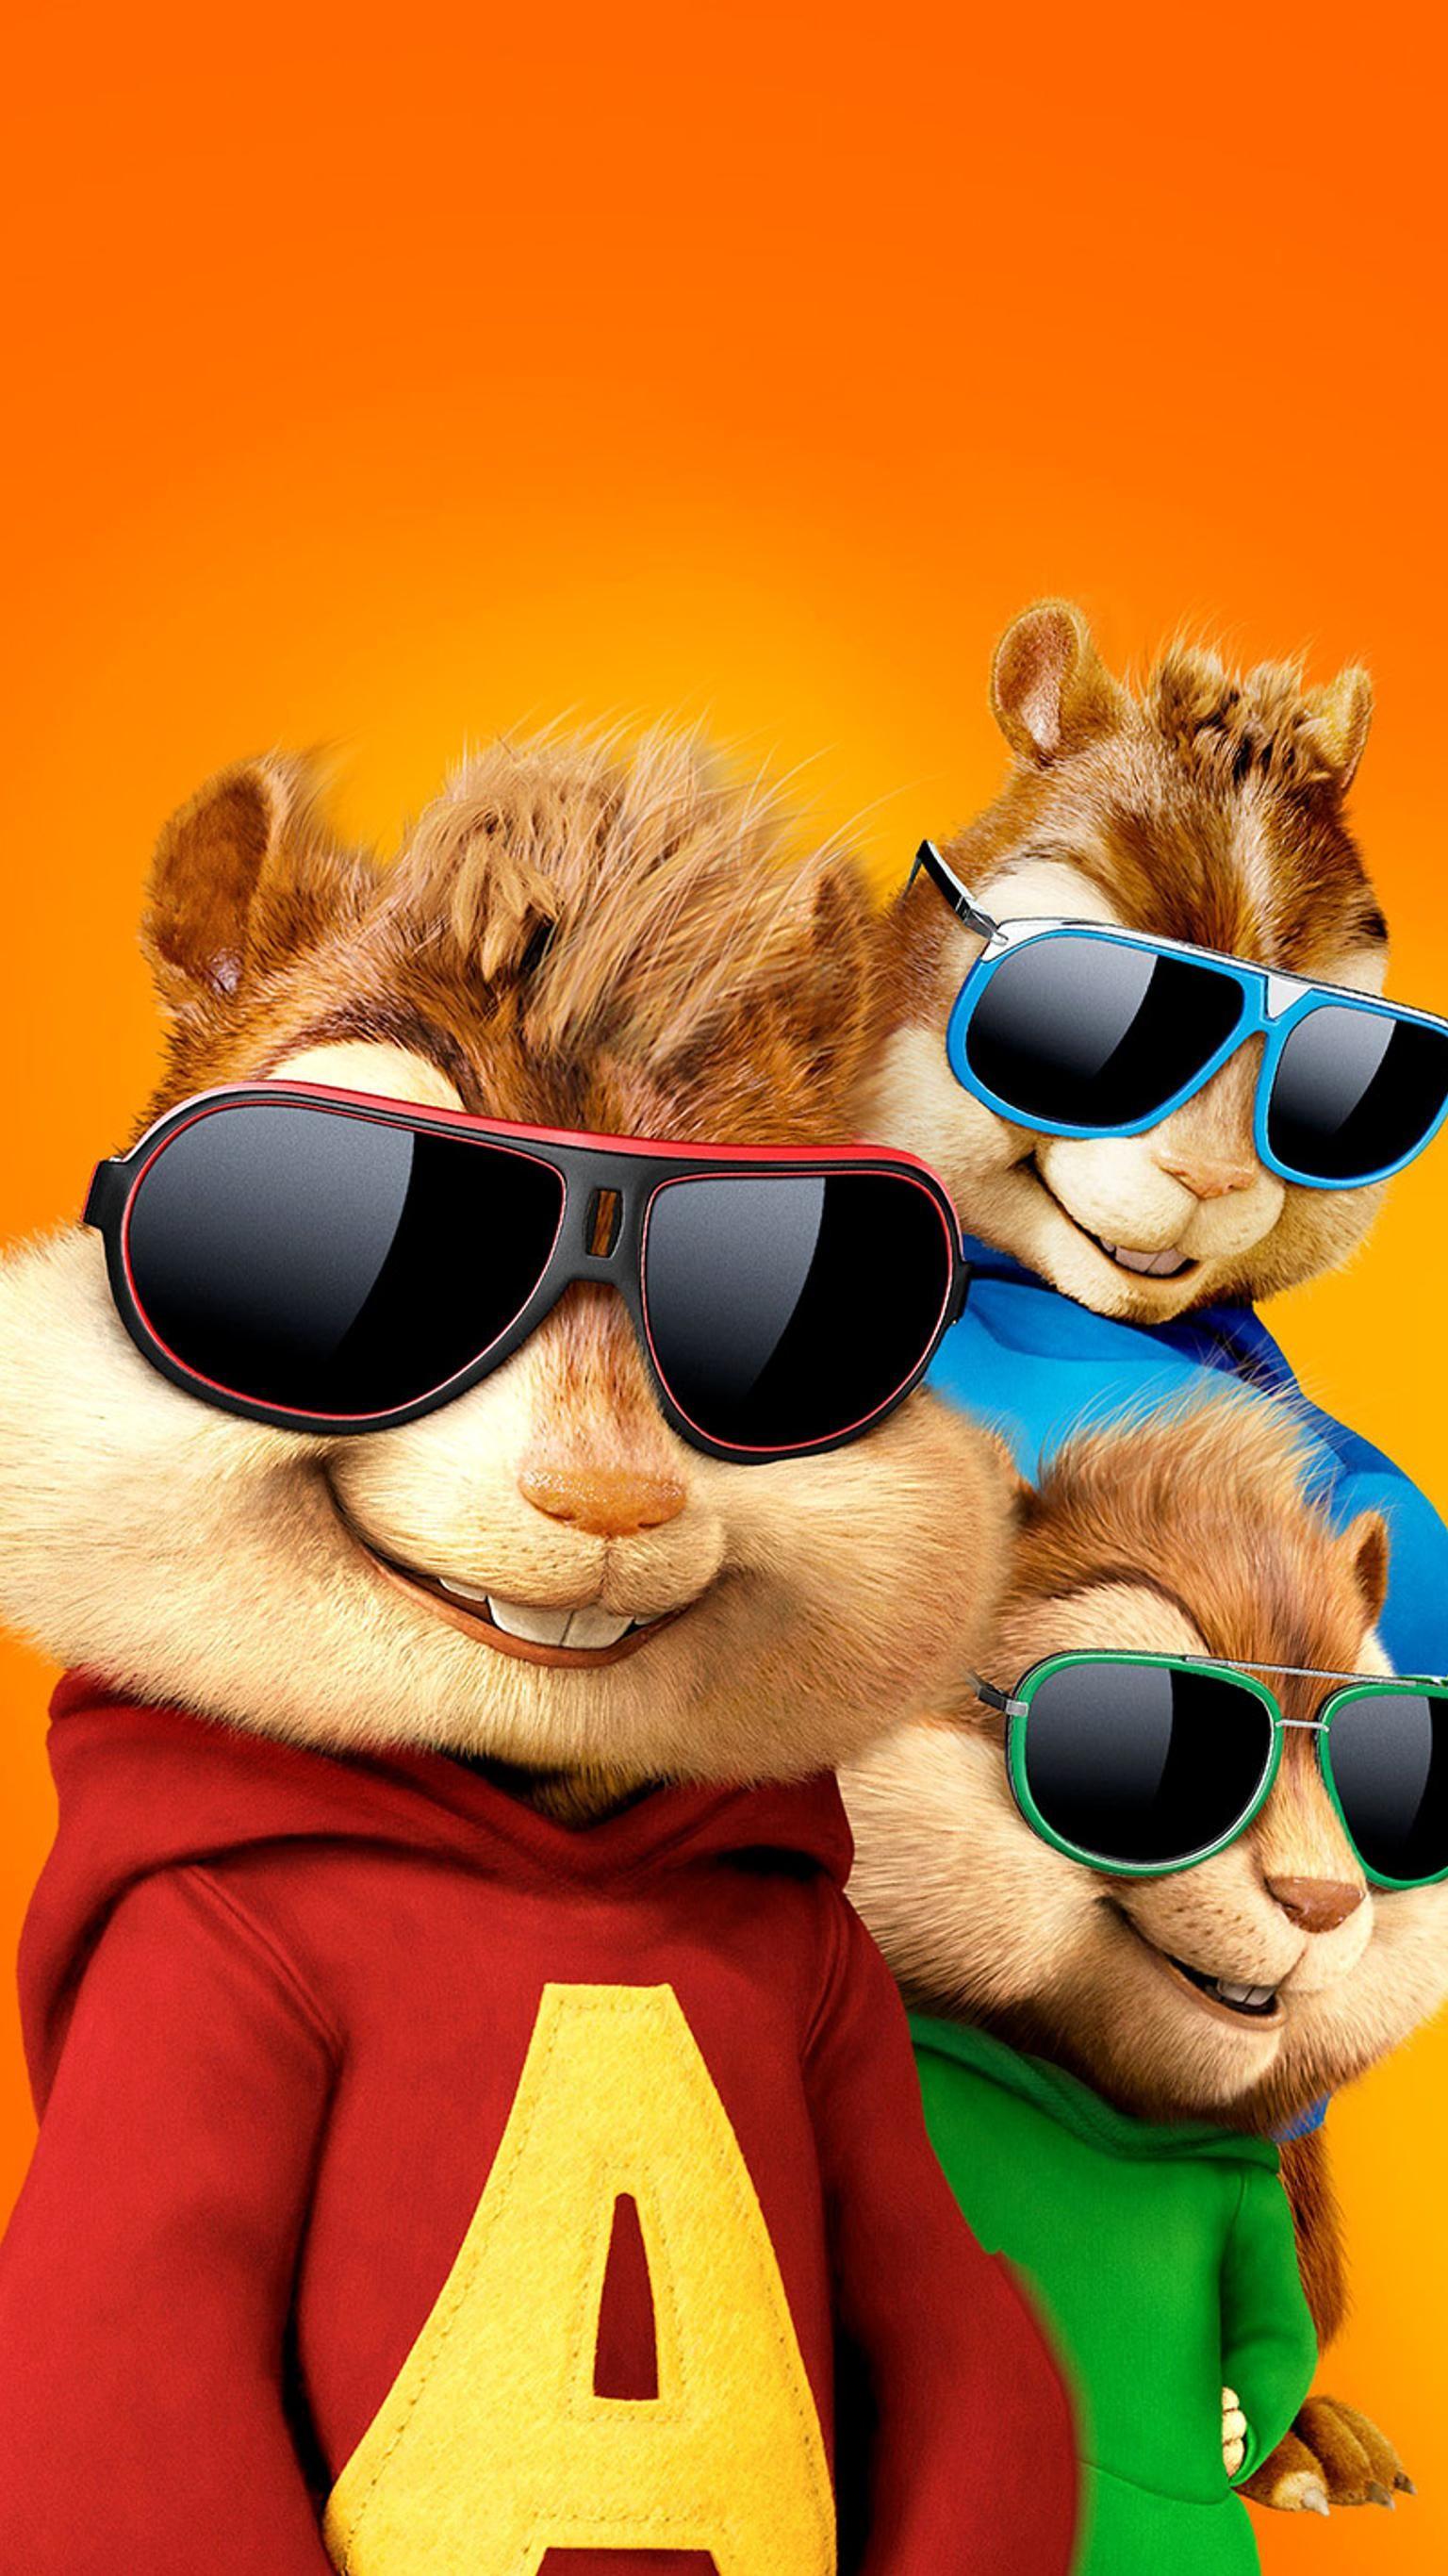 alvin and the chipmunks in tamilrockers com